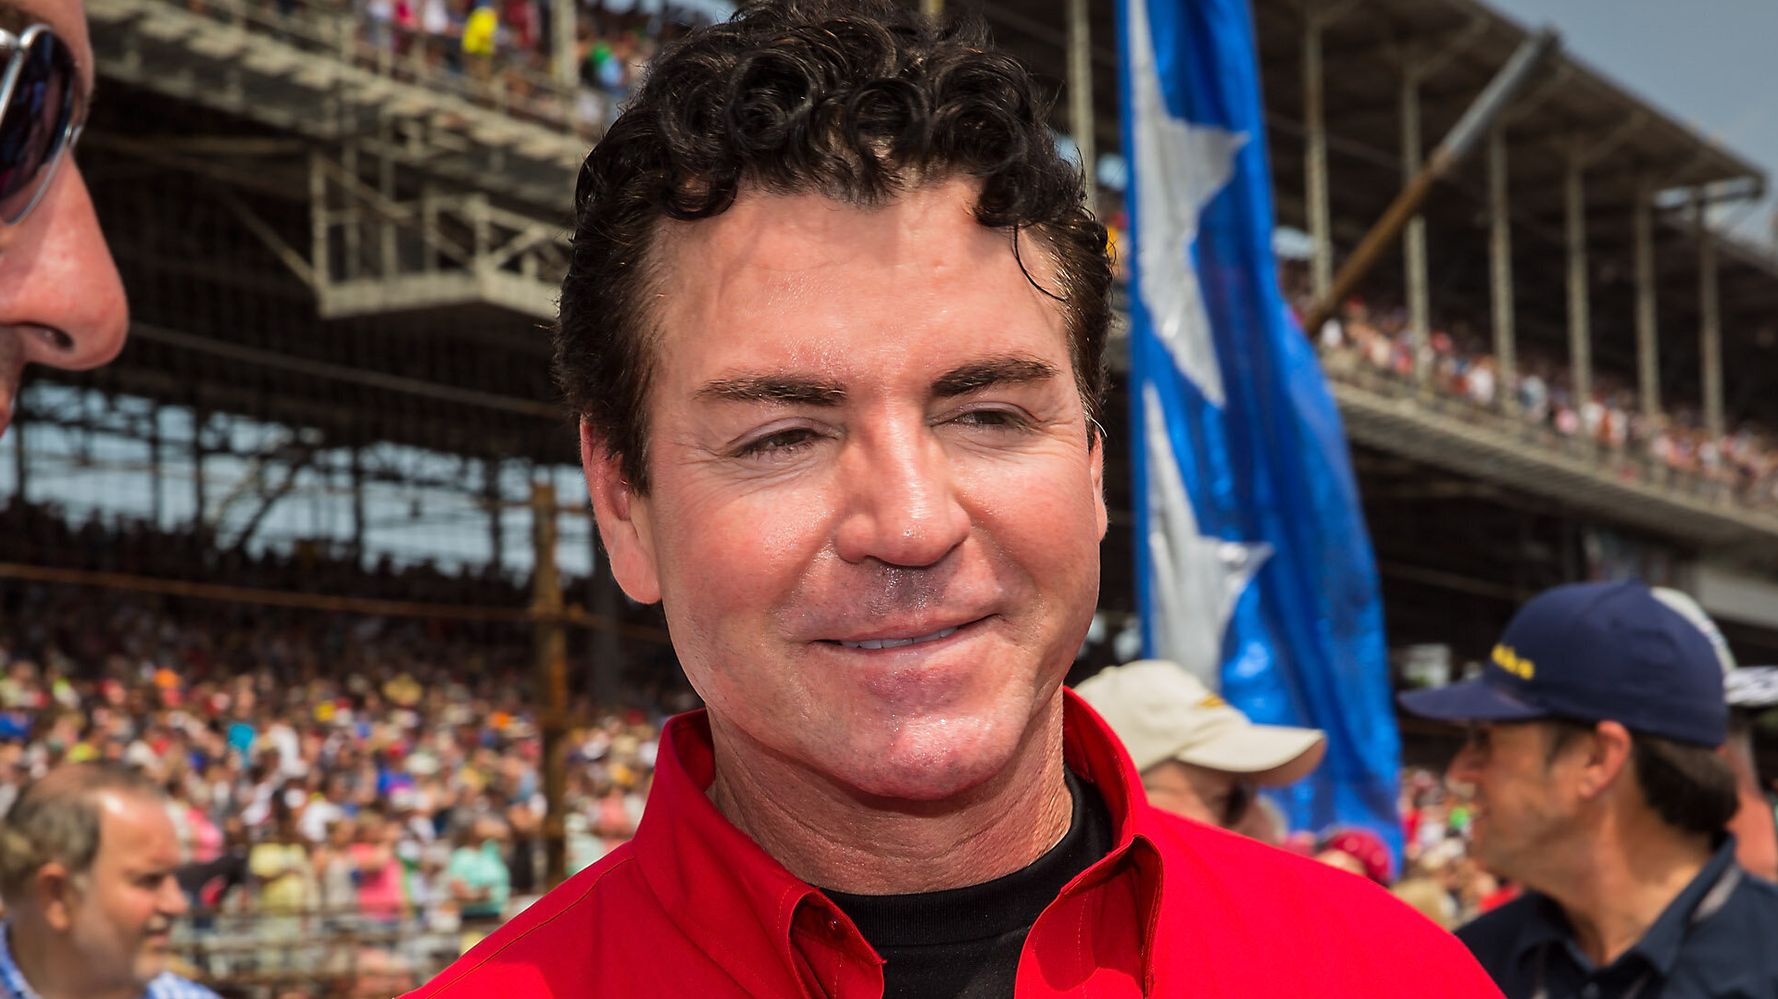 Disgraced Papa John’s founder claims his ‘conservative values’ made better pizza